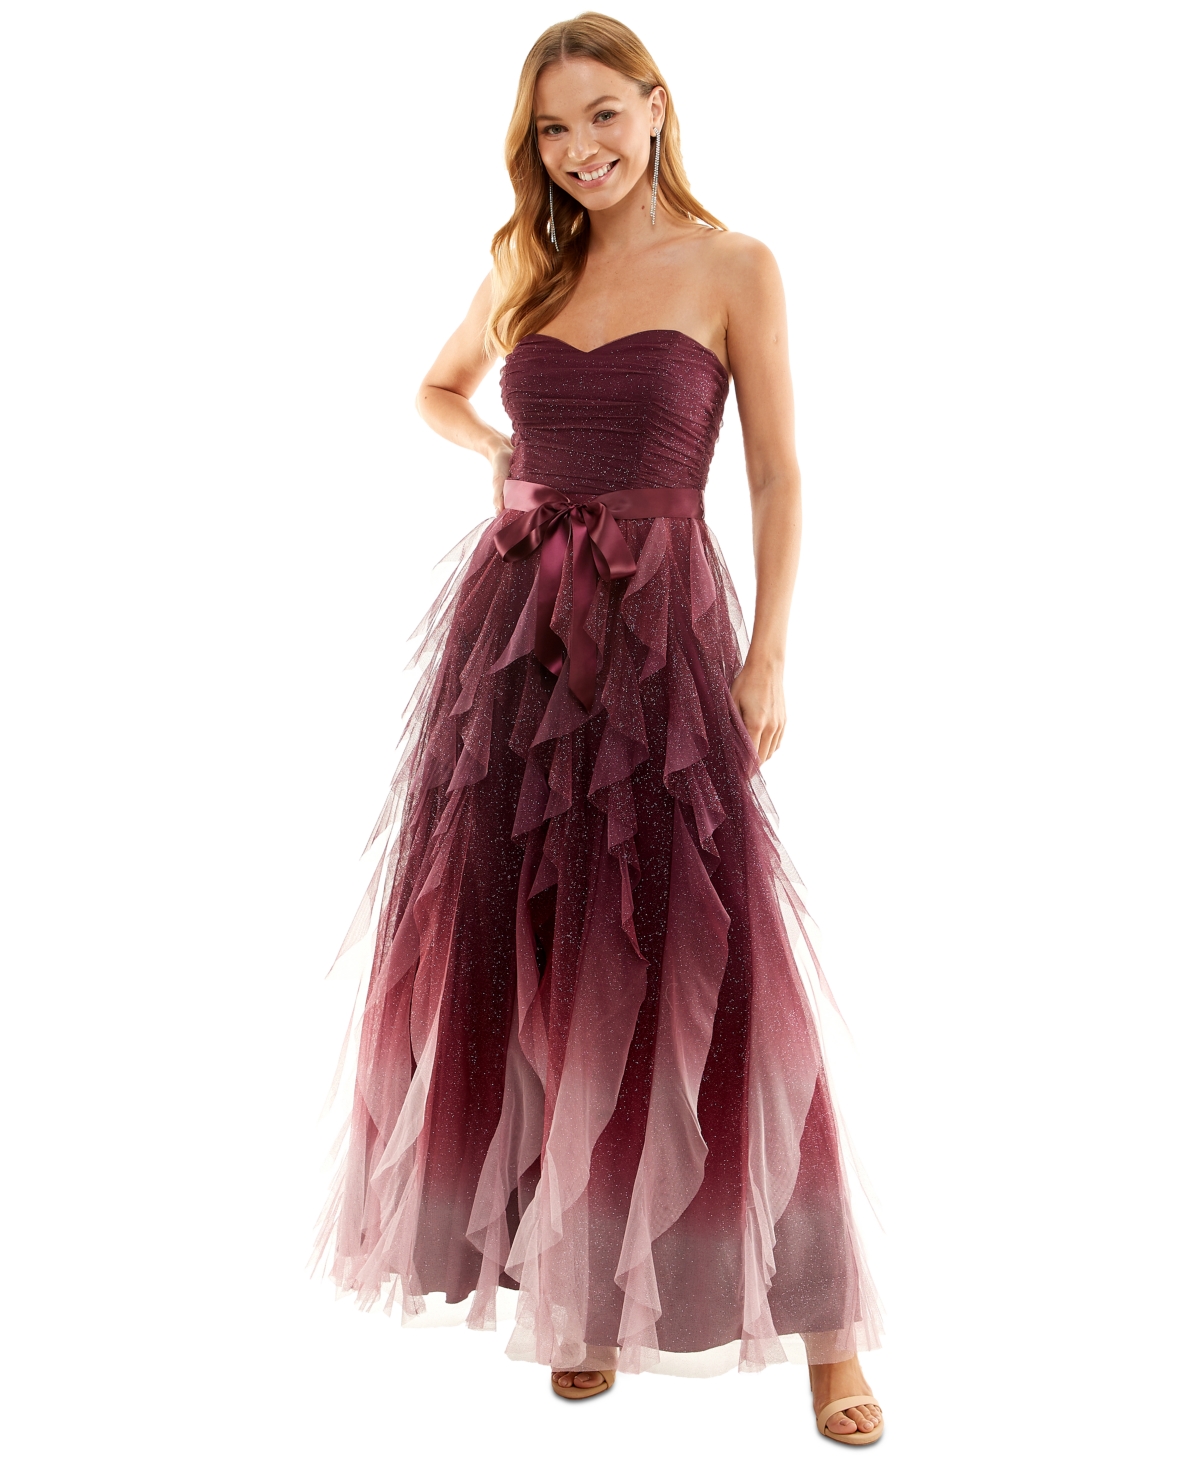 Pear Culture Juniors' Corkscrew-ruffled Strapless Gown In Burgundy/pink